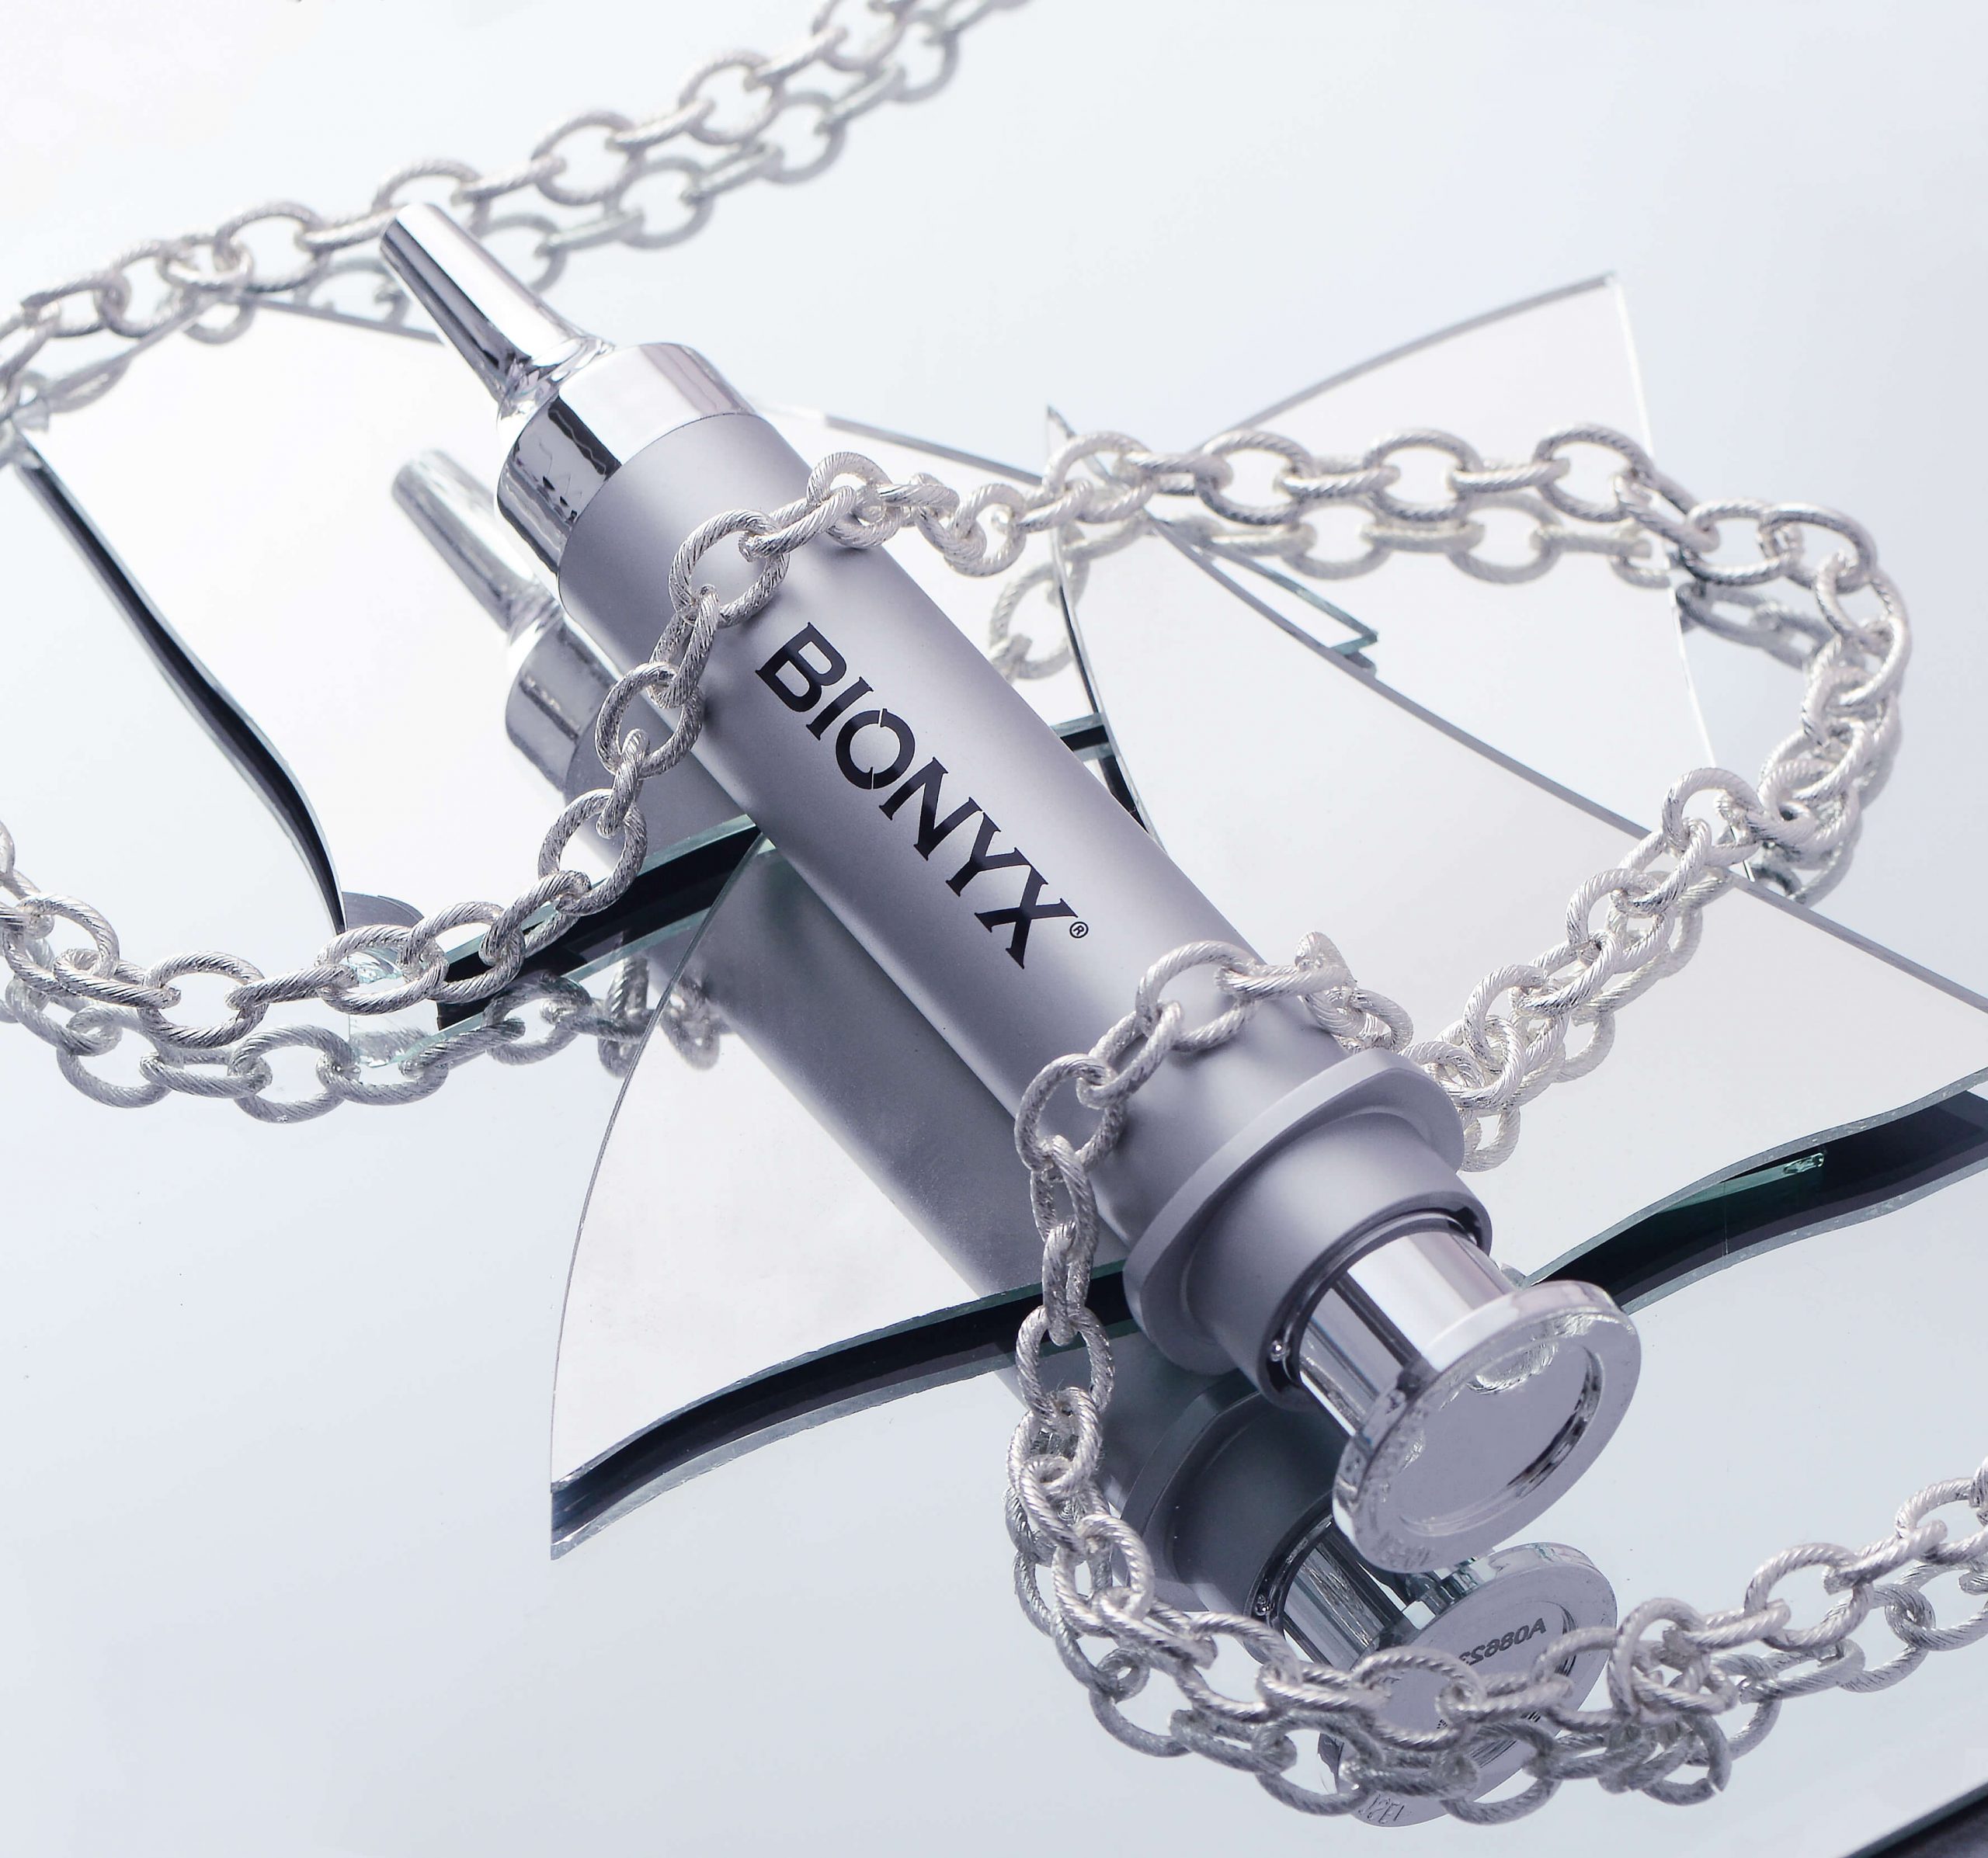 Bionyx syringe - New Year’s Resolutions for Your Skin